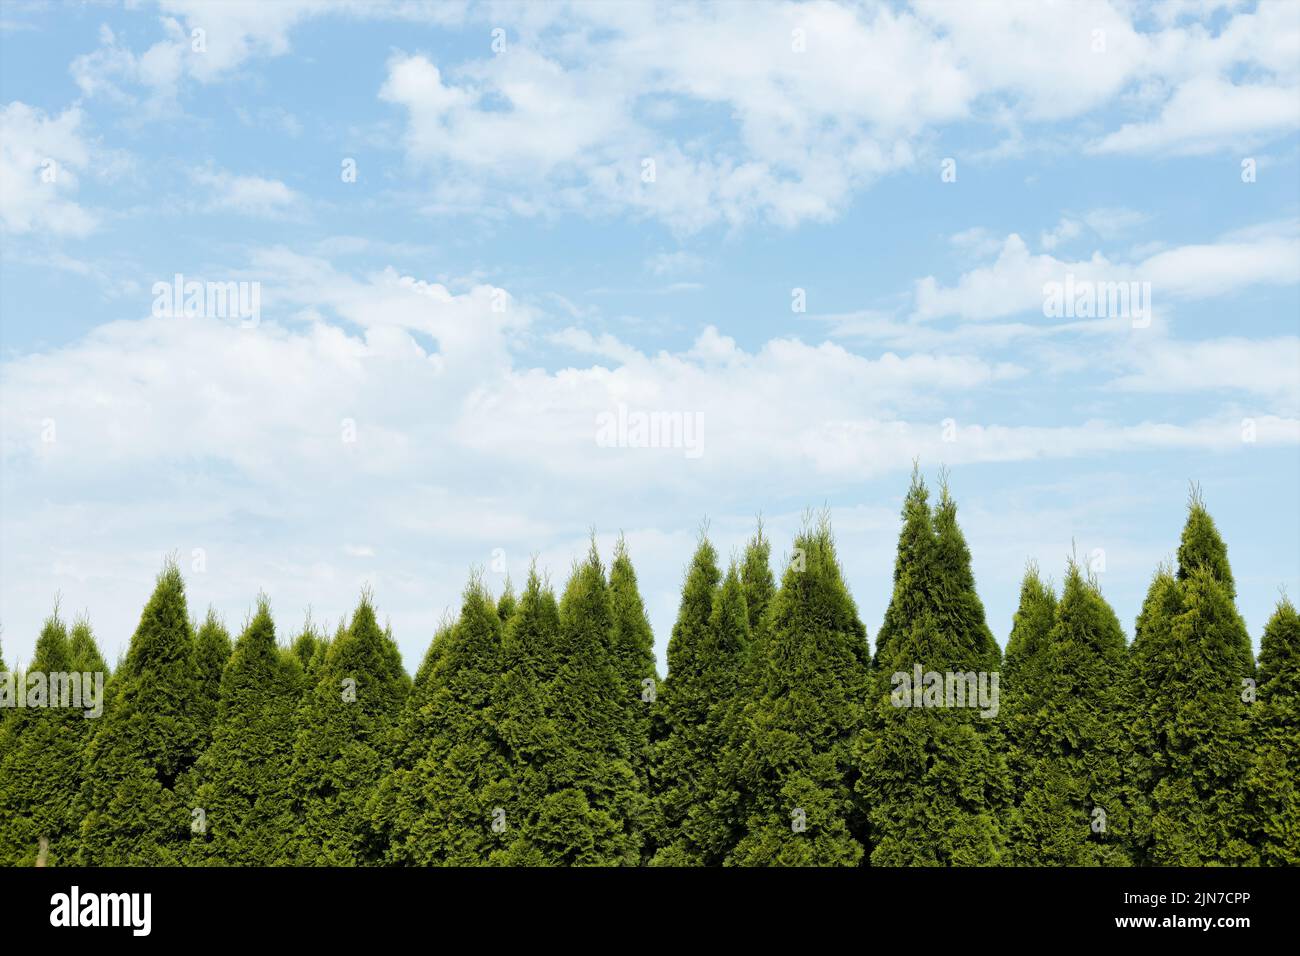 Tips of conifer trees against a blue sky with a few clouds. Stock Photo